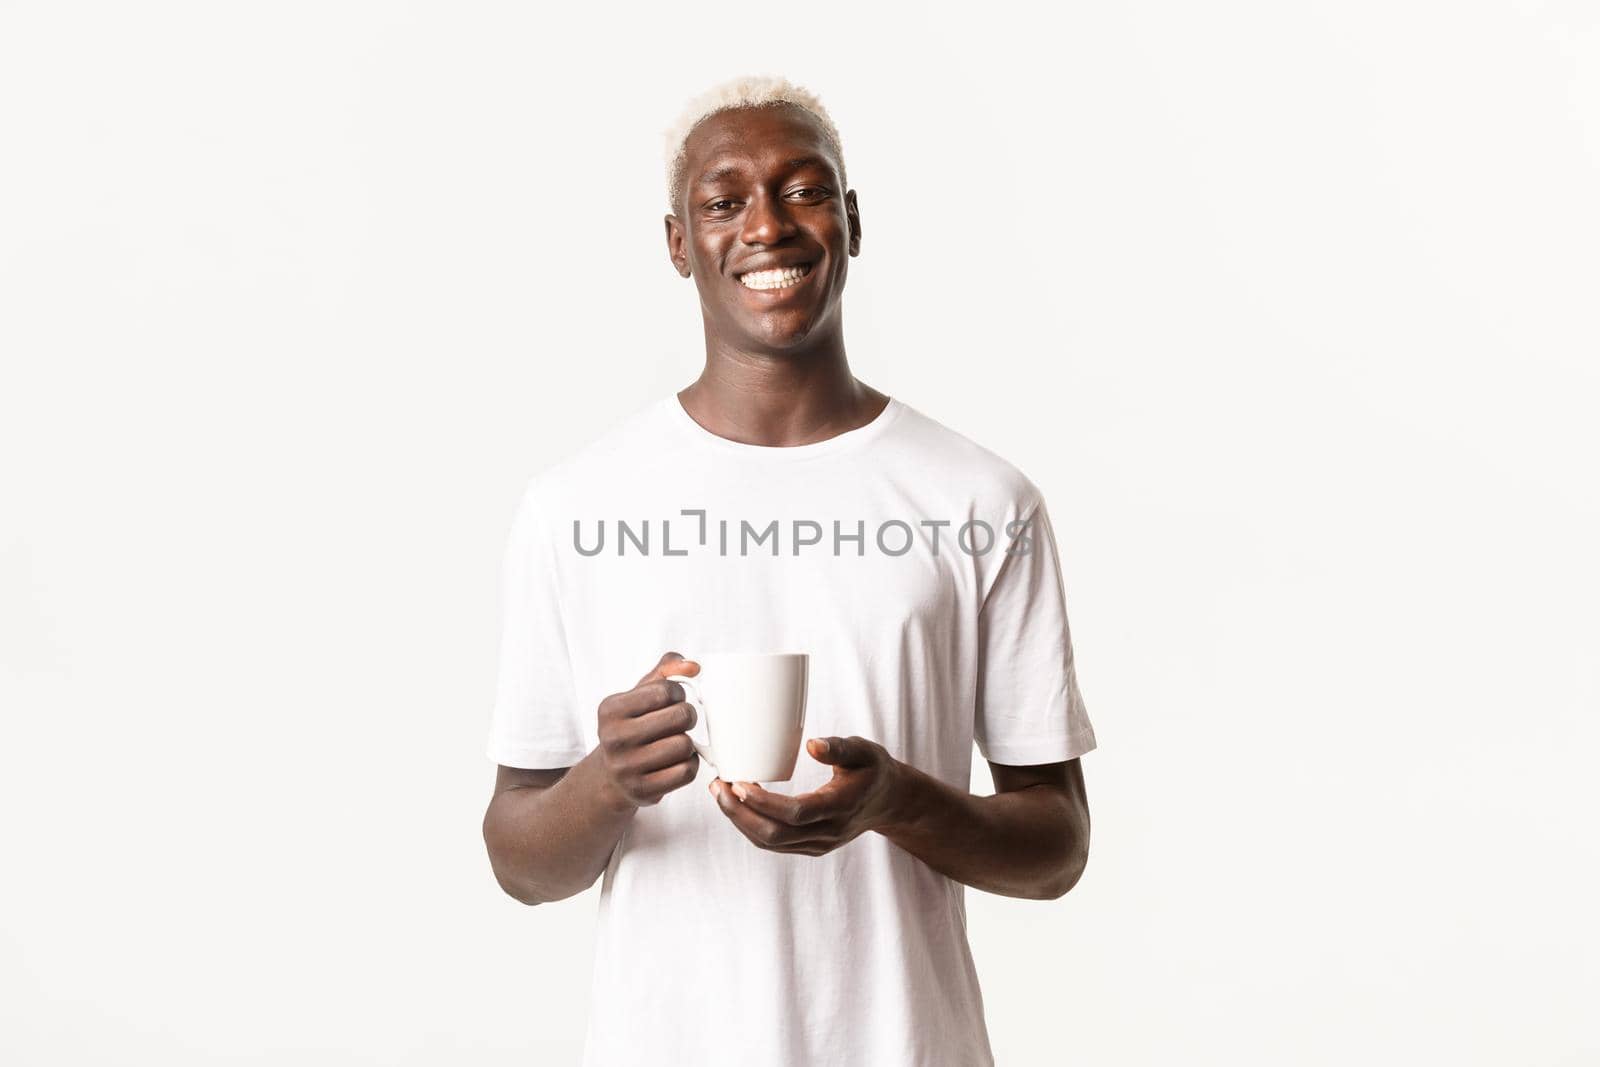 Portrait of happy smiling african-american blond man, looking satisfied, drinking coffee or tea, standing over white background.